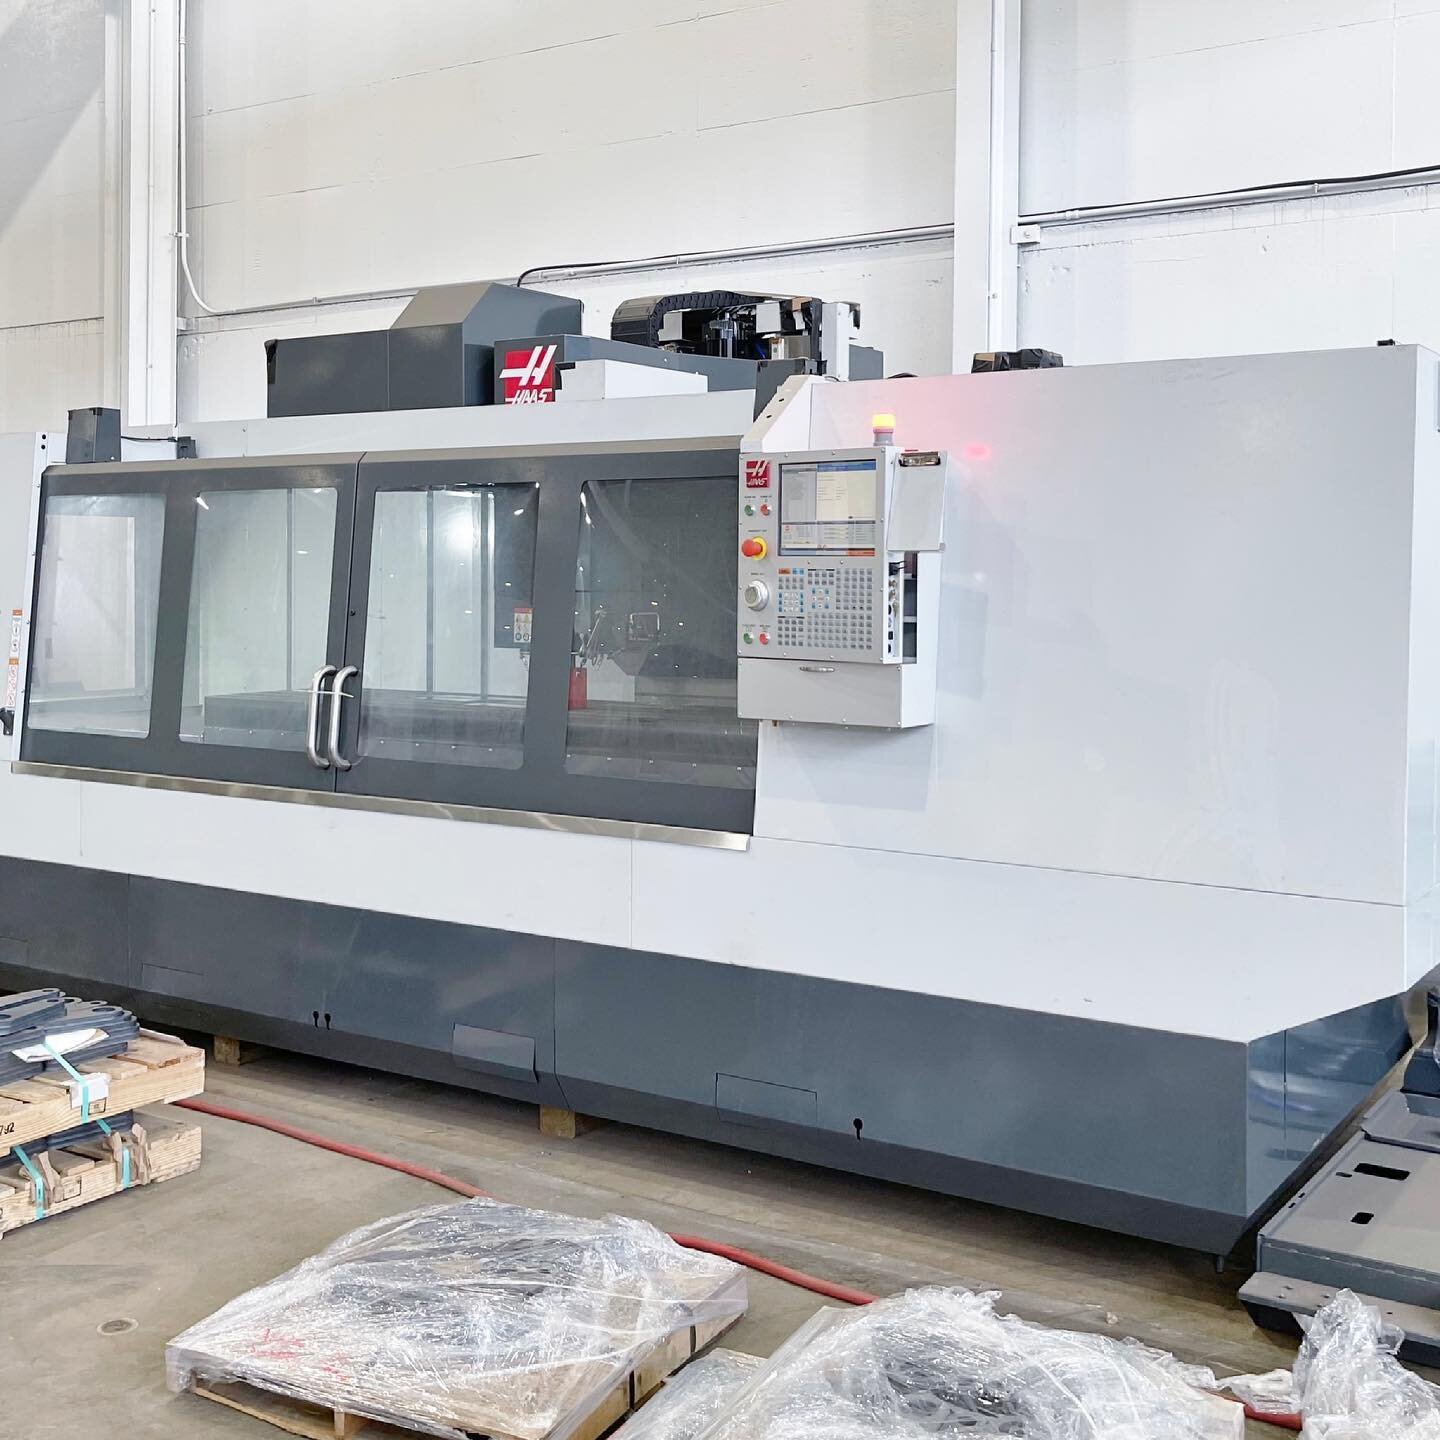 (USED) 2020 HAAS VF11 - Incredibly rare find, like new condition. Replacement cost new $270K. Under power and available for inspection.  Contact us for pricing and more details at info@norcalmachinery.com. They don't get any cleaner than this! #haasv